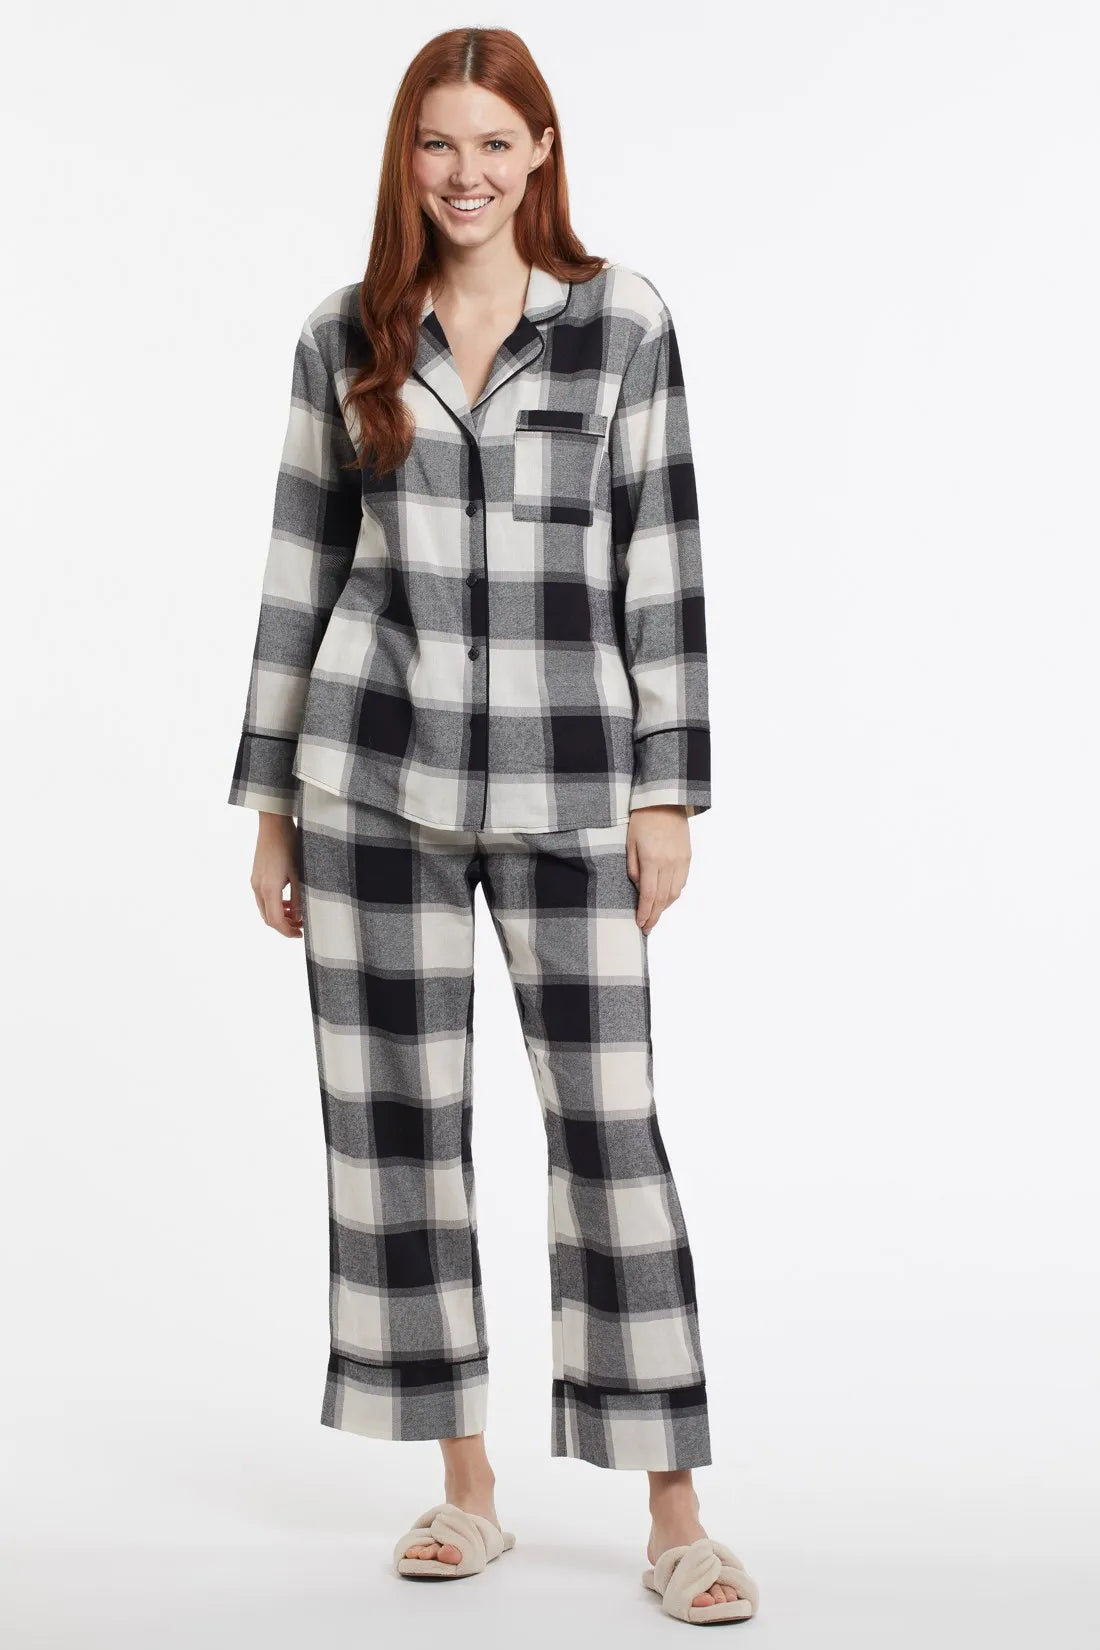 A woman wearing a Tribal 2-Piece Plaid Flannel Pajama Set in front of a cozy fireplace.